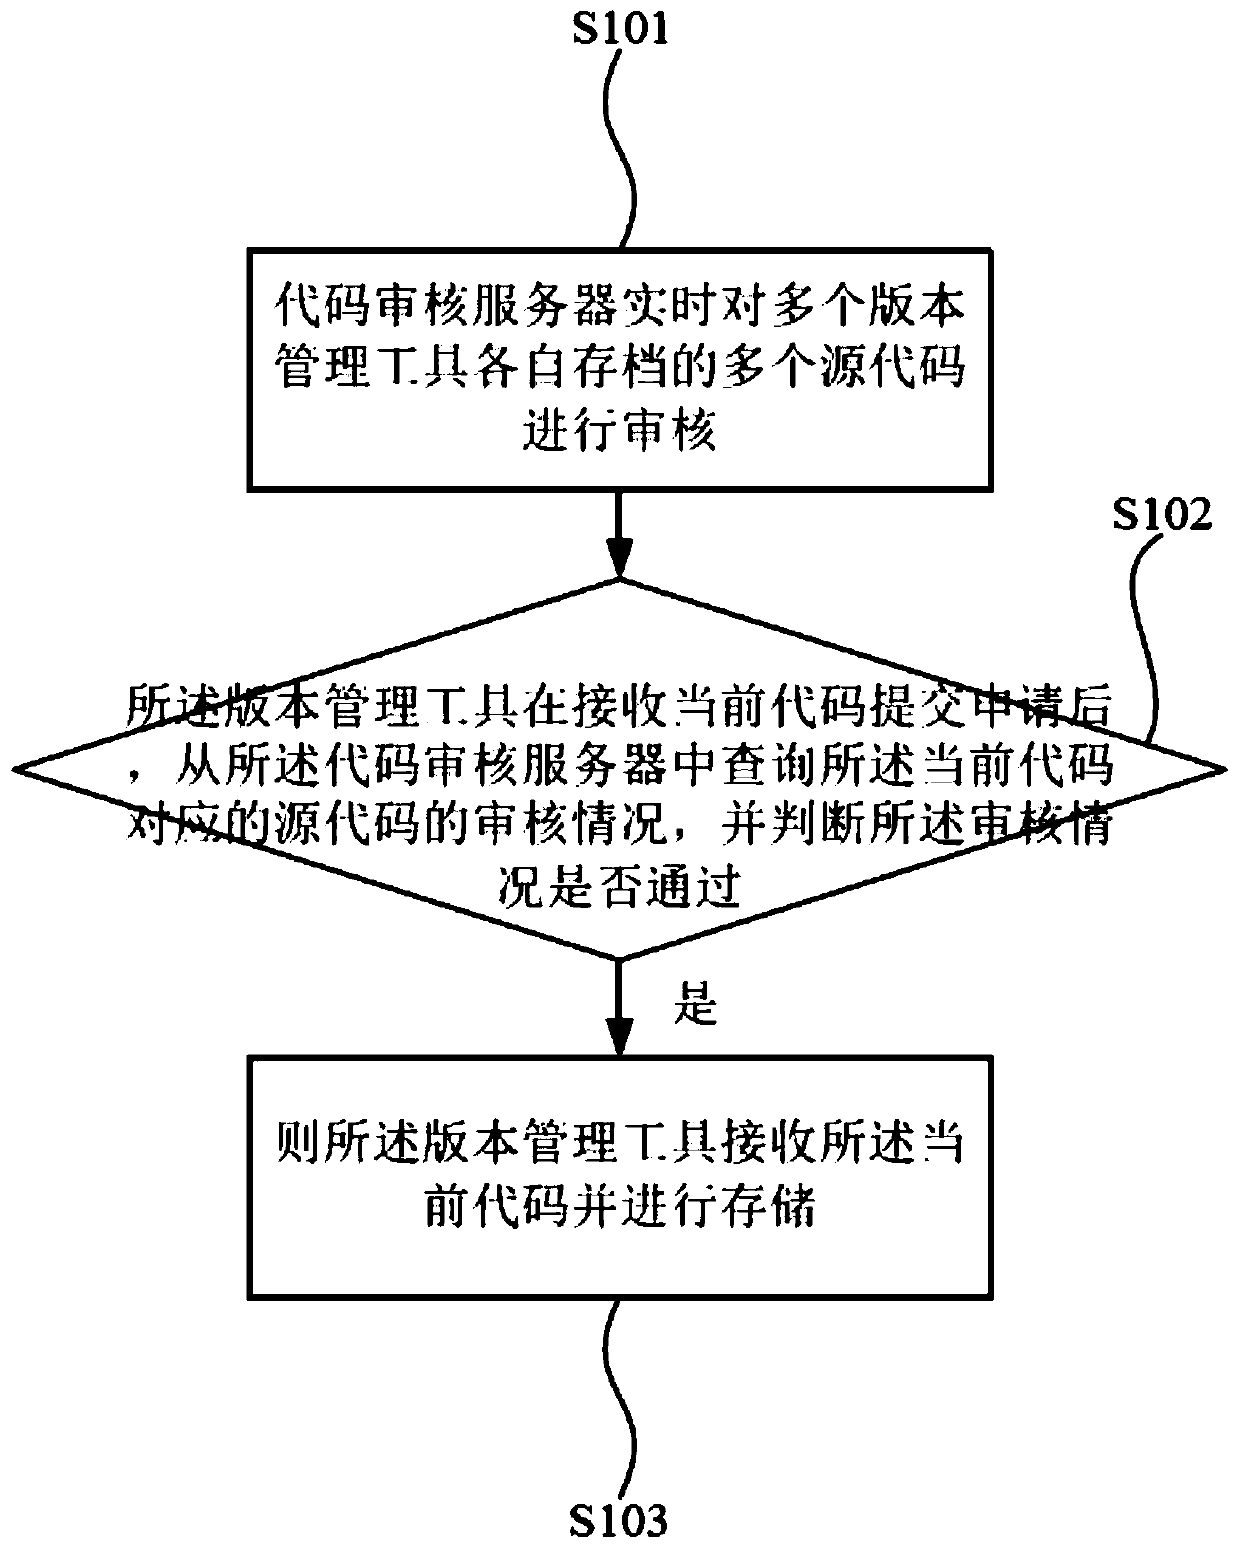 Code control method and system